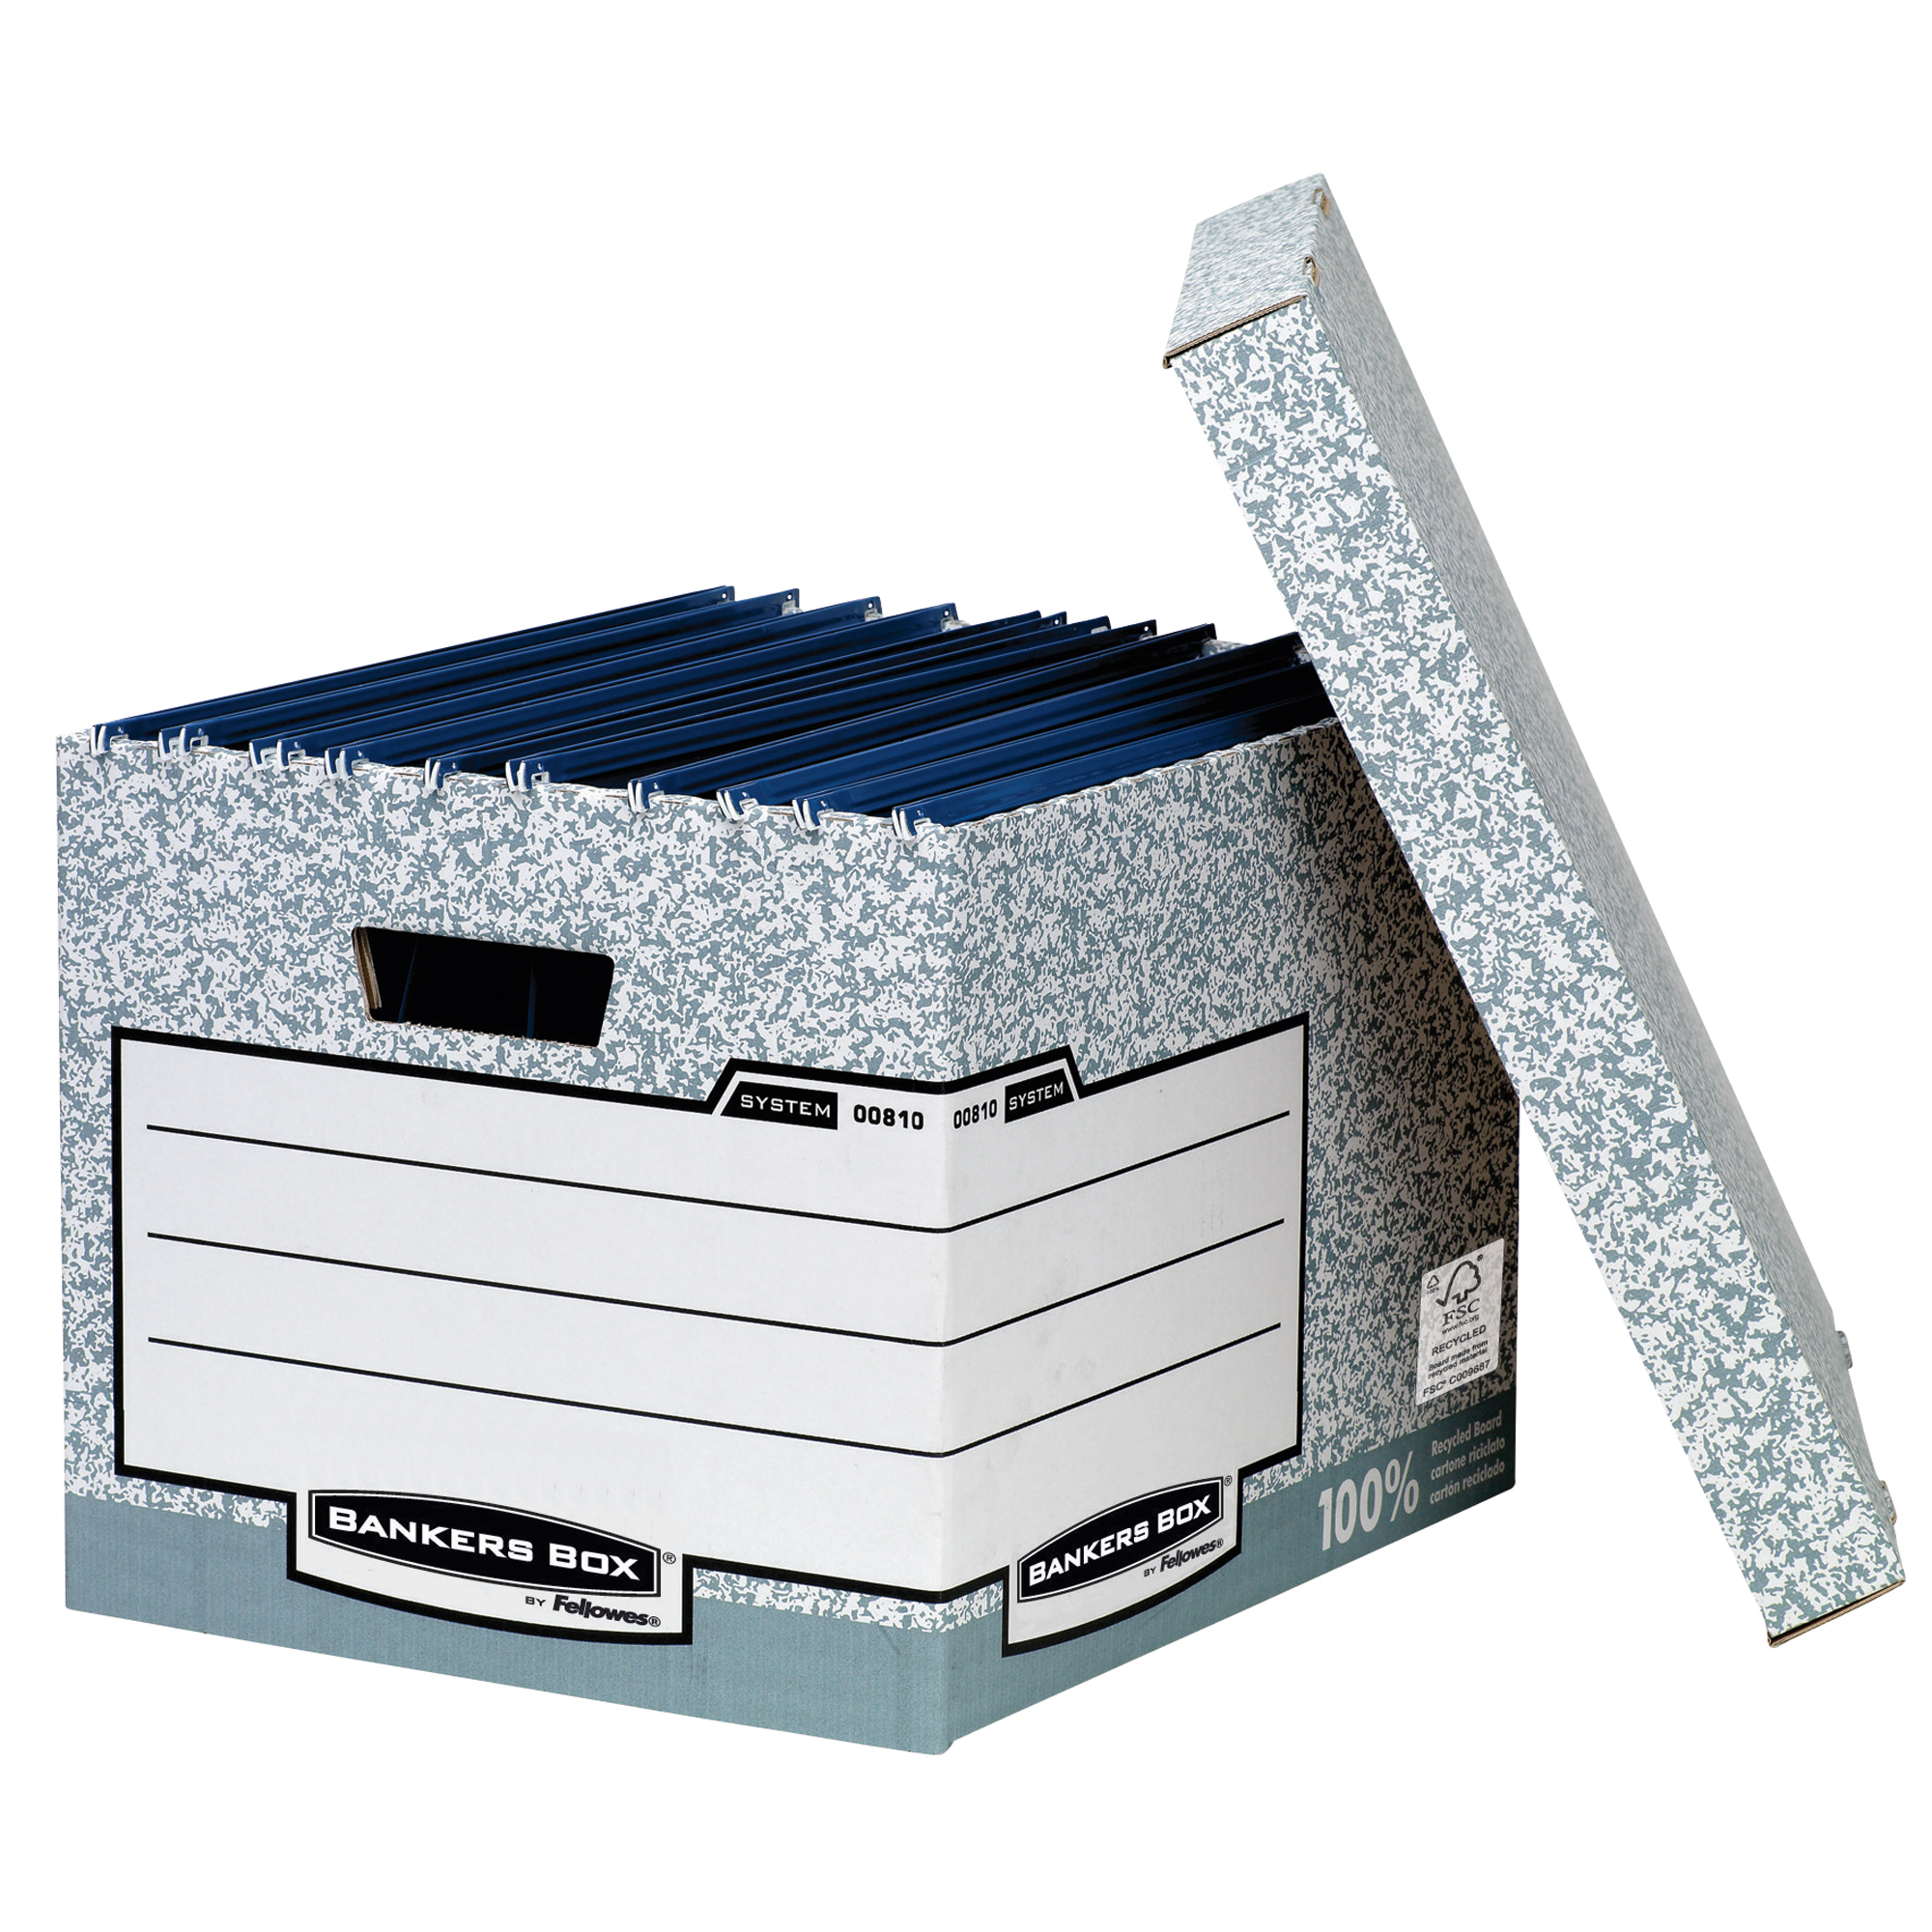 Bankers Box® Archivbox System 33,3 x 28,5 x 39 cm